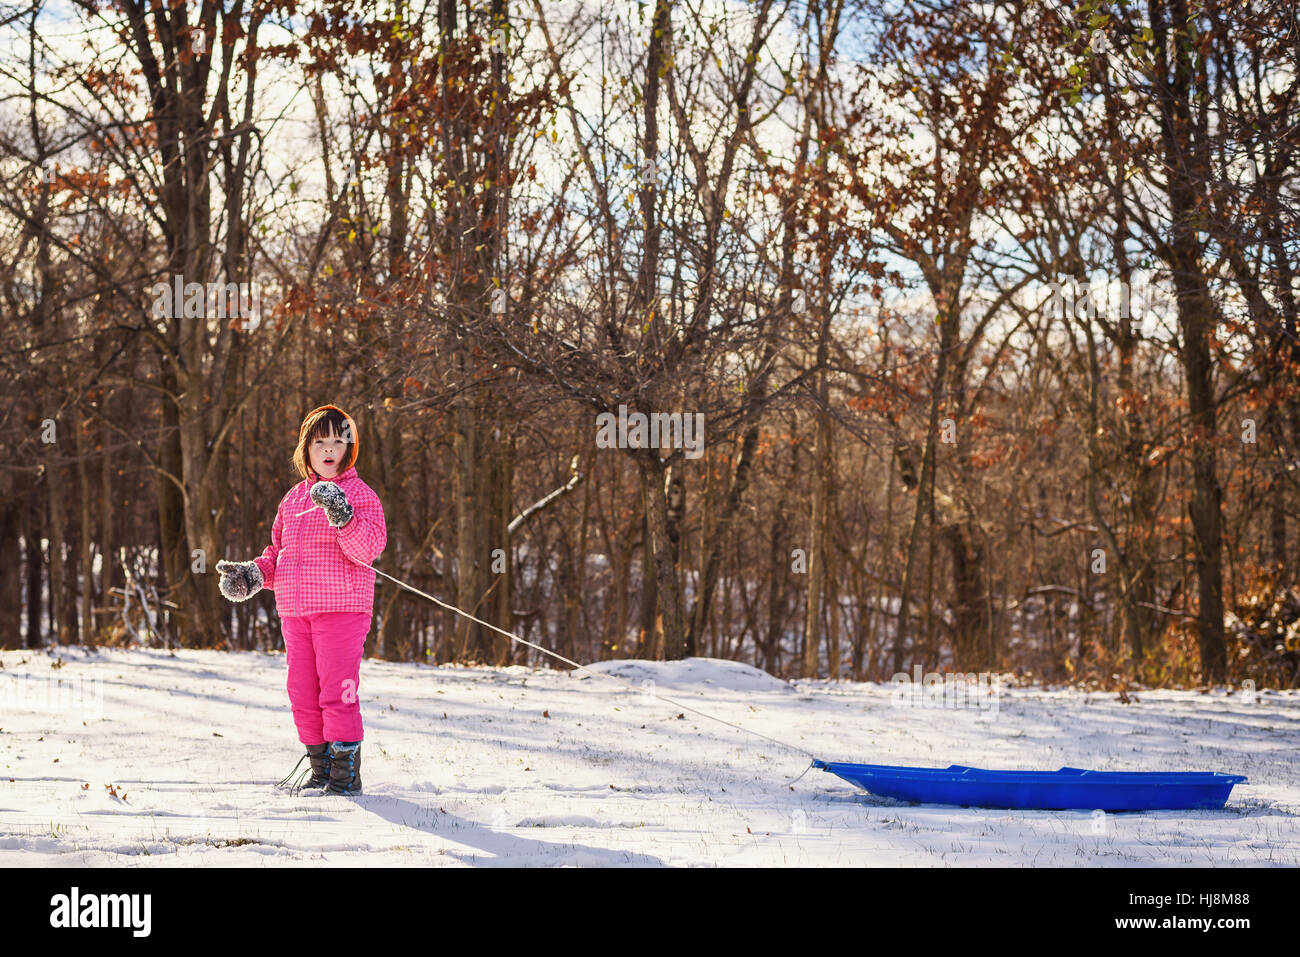 Girl pulling her sledge through the snow Stock Photo